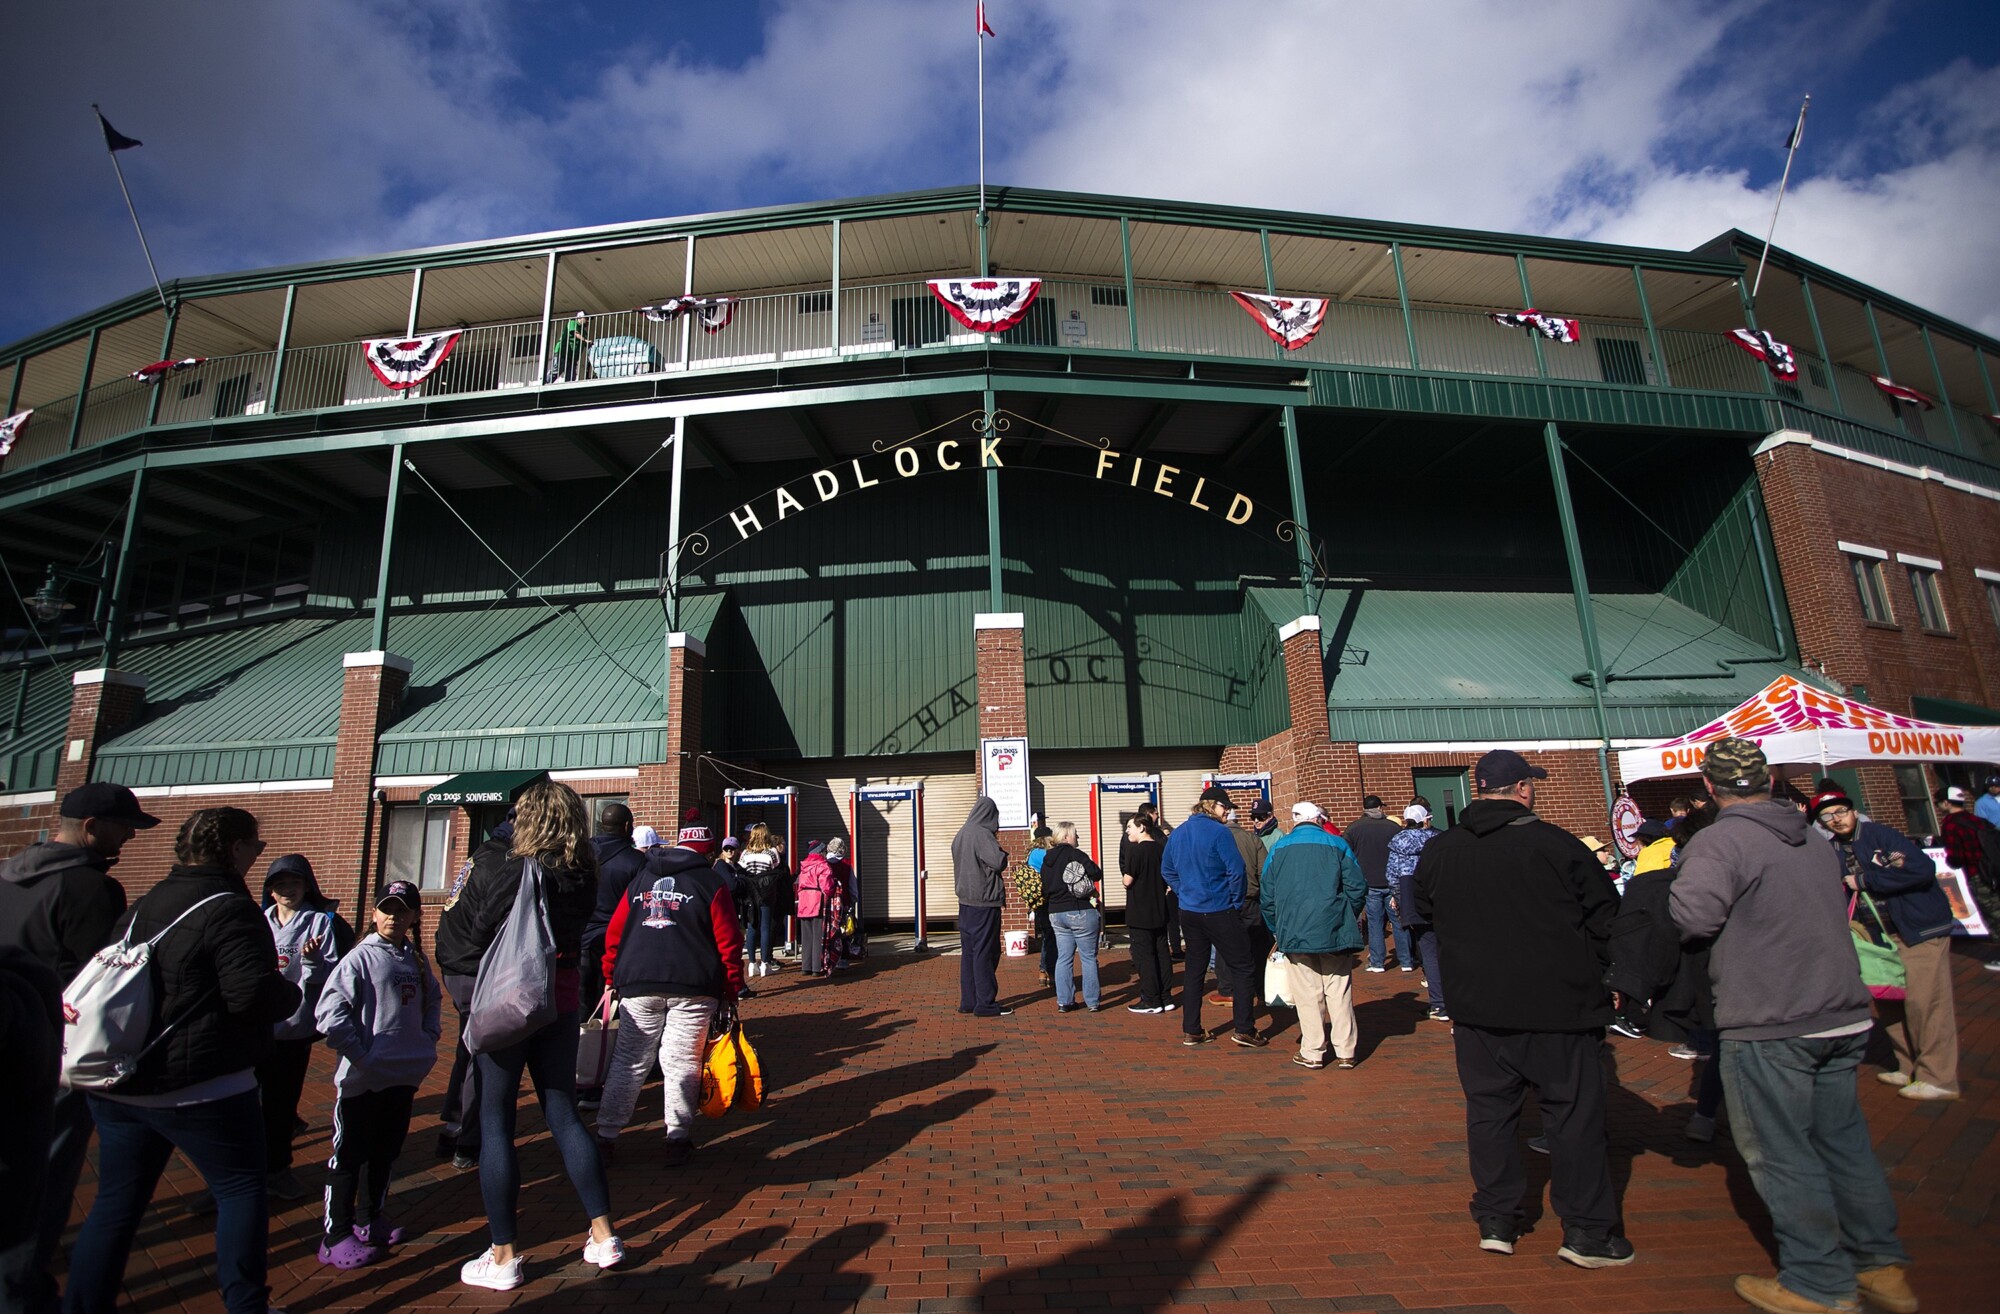 I-Cubs: Ownership shifts as Endeavor sells ten teams to investor